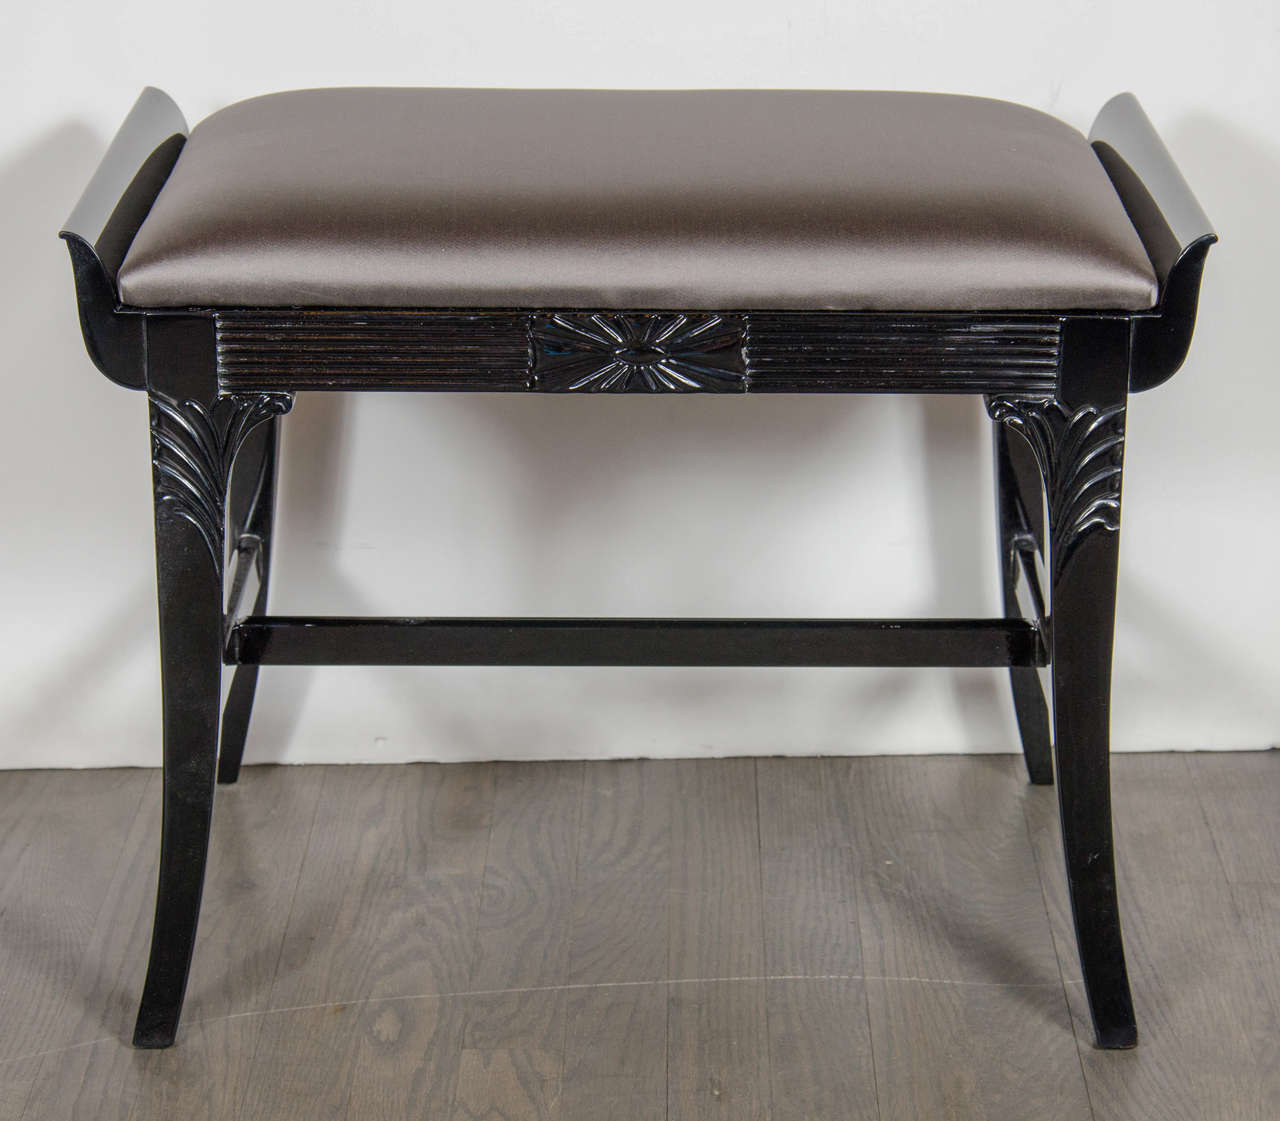 1940's Hollywood hand-carved bench / stool by Grosfeld House in ebonized Walnut featuring sloped design arms that extend up from the fluted surround featuring a sunburst design centerpiece.  The legs have a slight splayed design topped with stylized